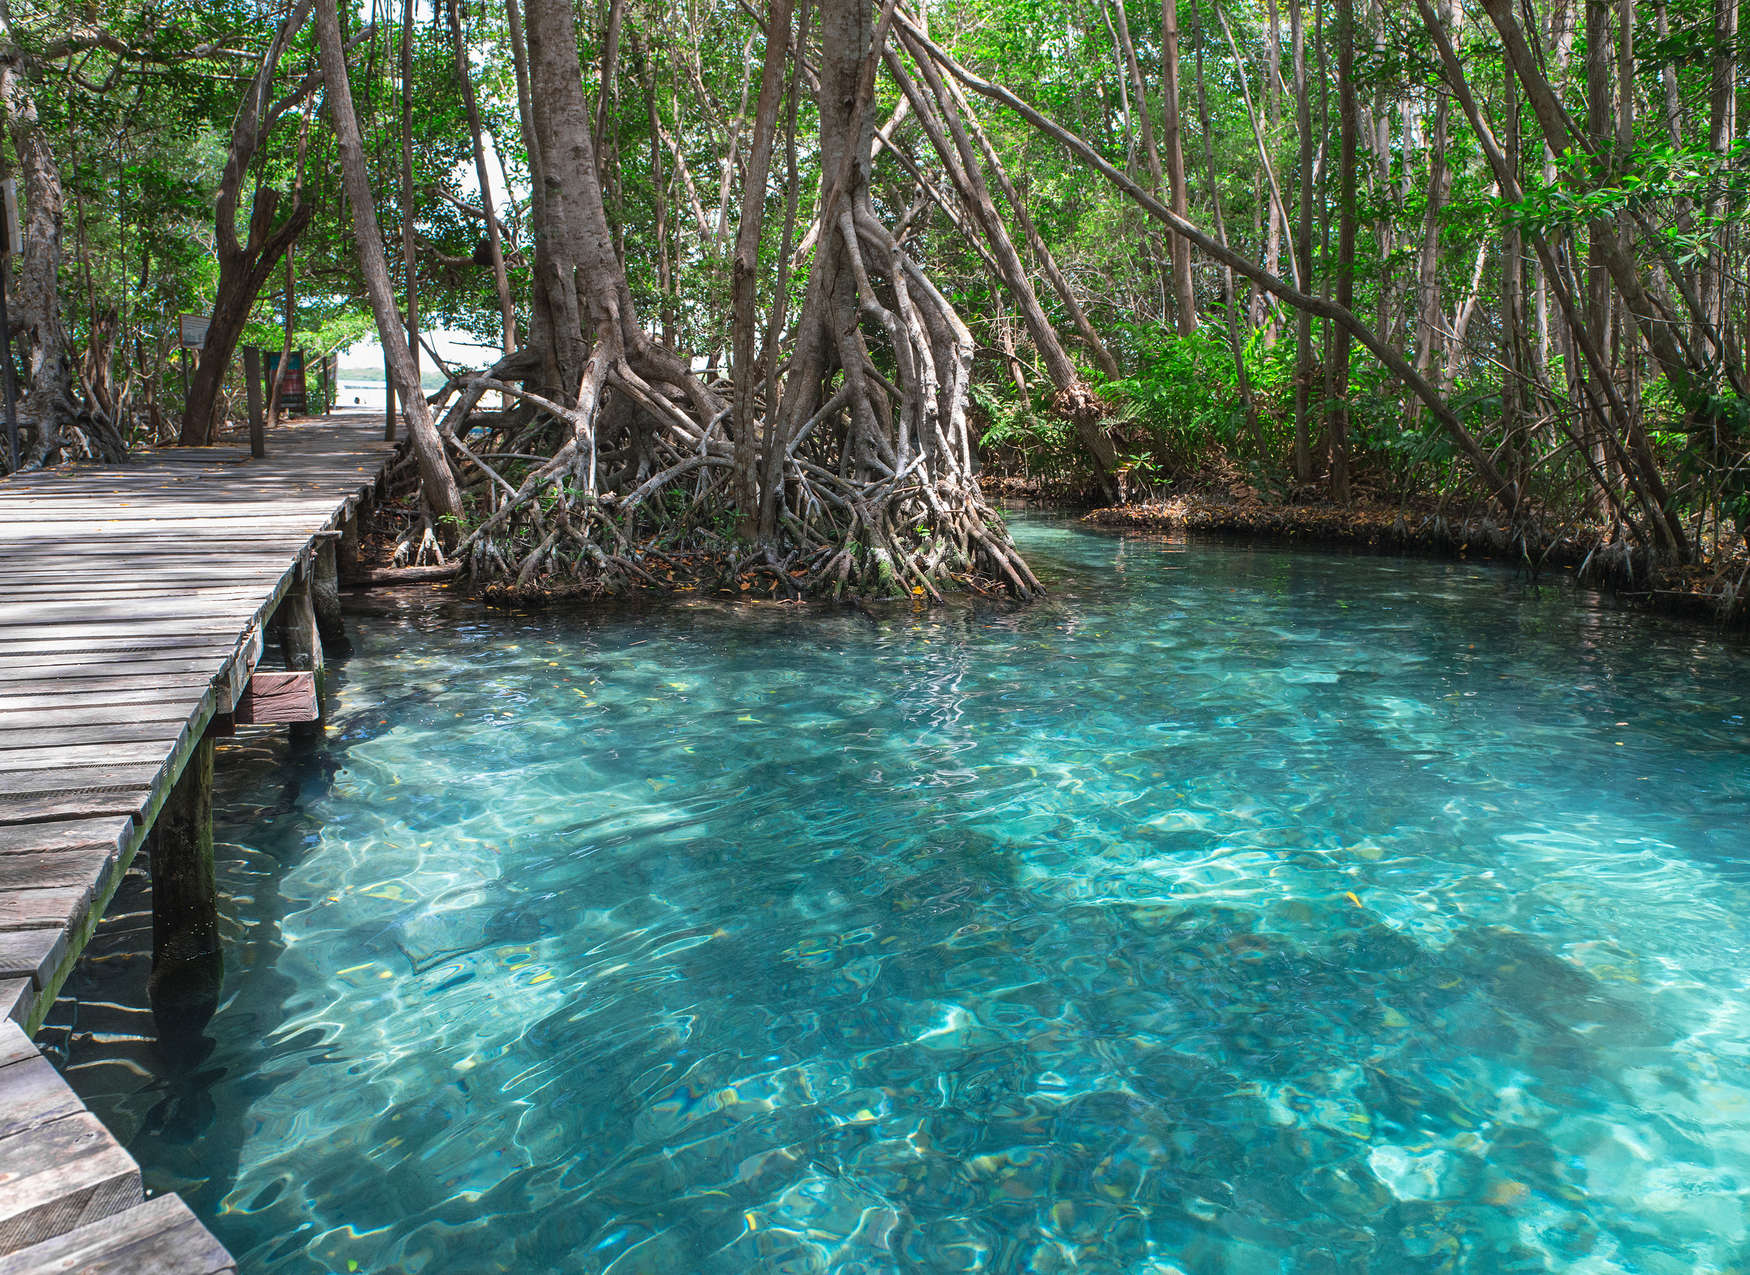             Wooden path across a lake in the jungle - blue, brown, green
        